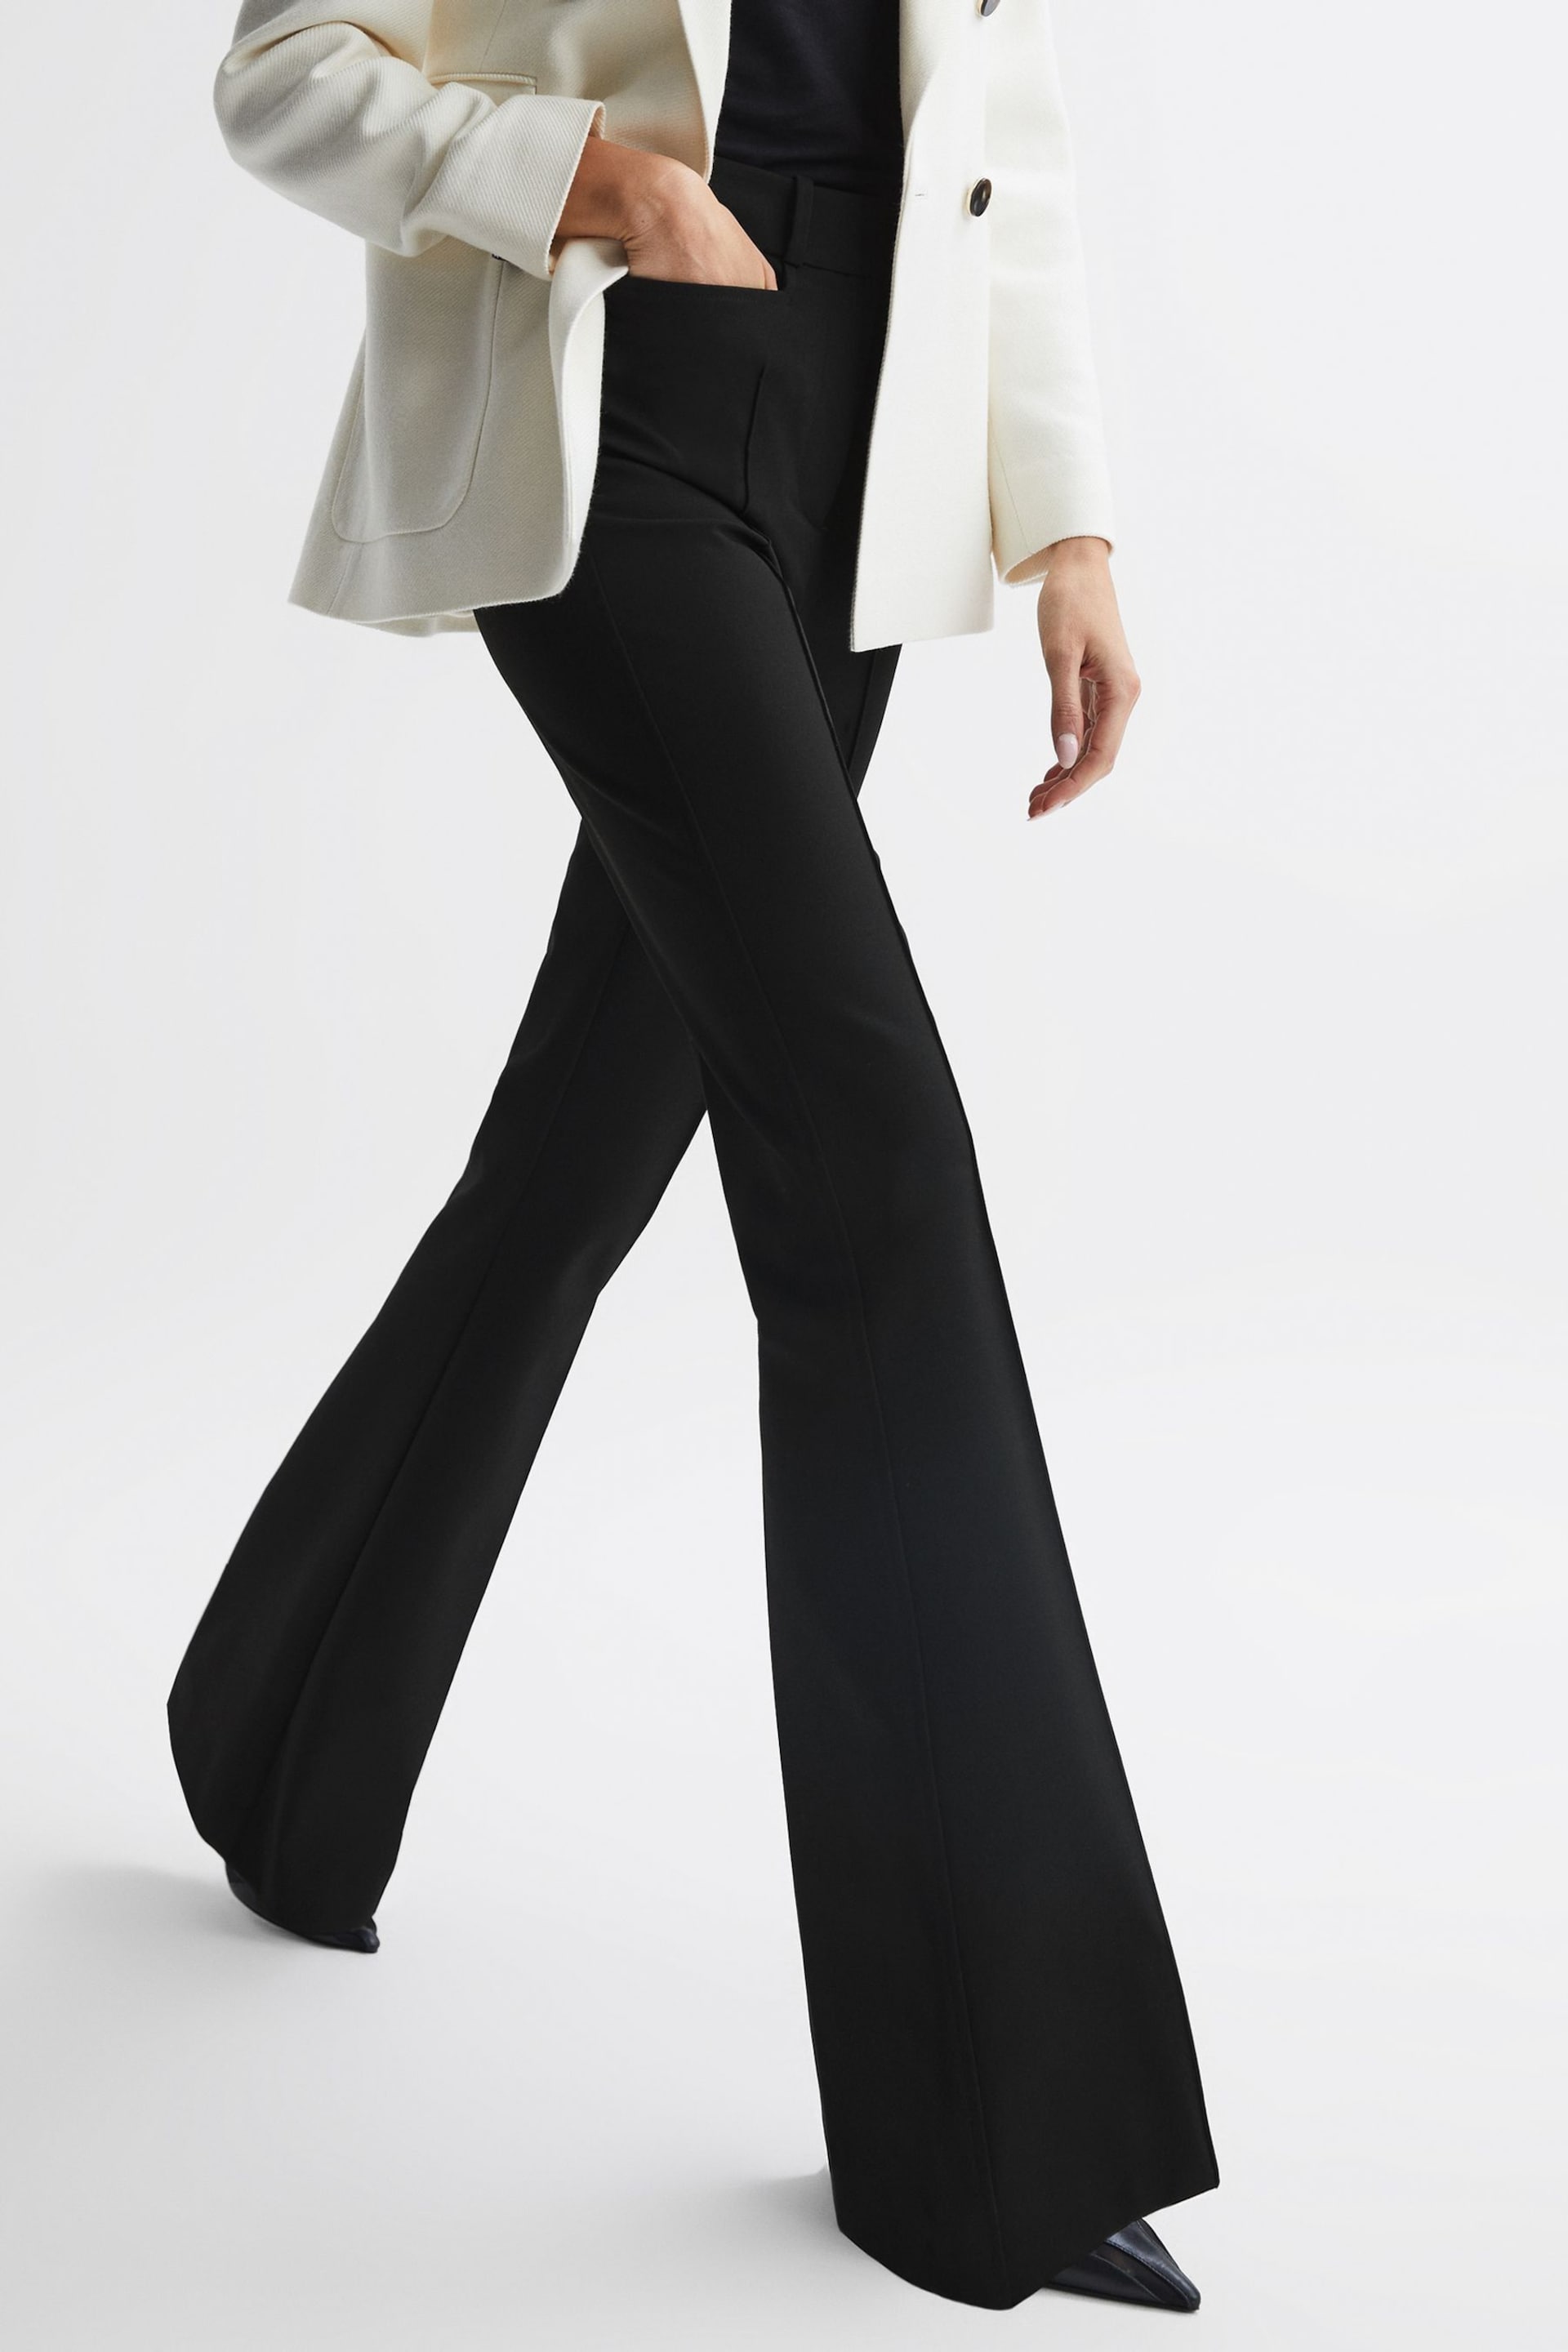 Reiss Black Dylan Petite Flared High Rise Trousers - Image 3 of 6